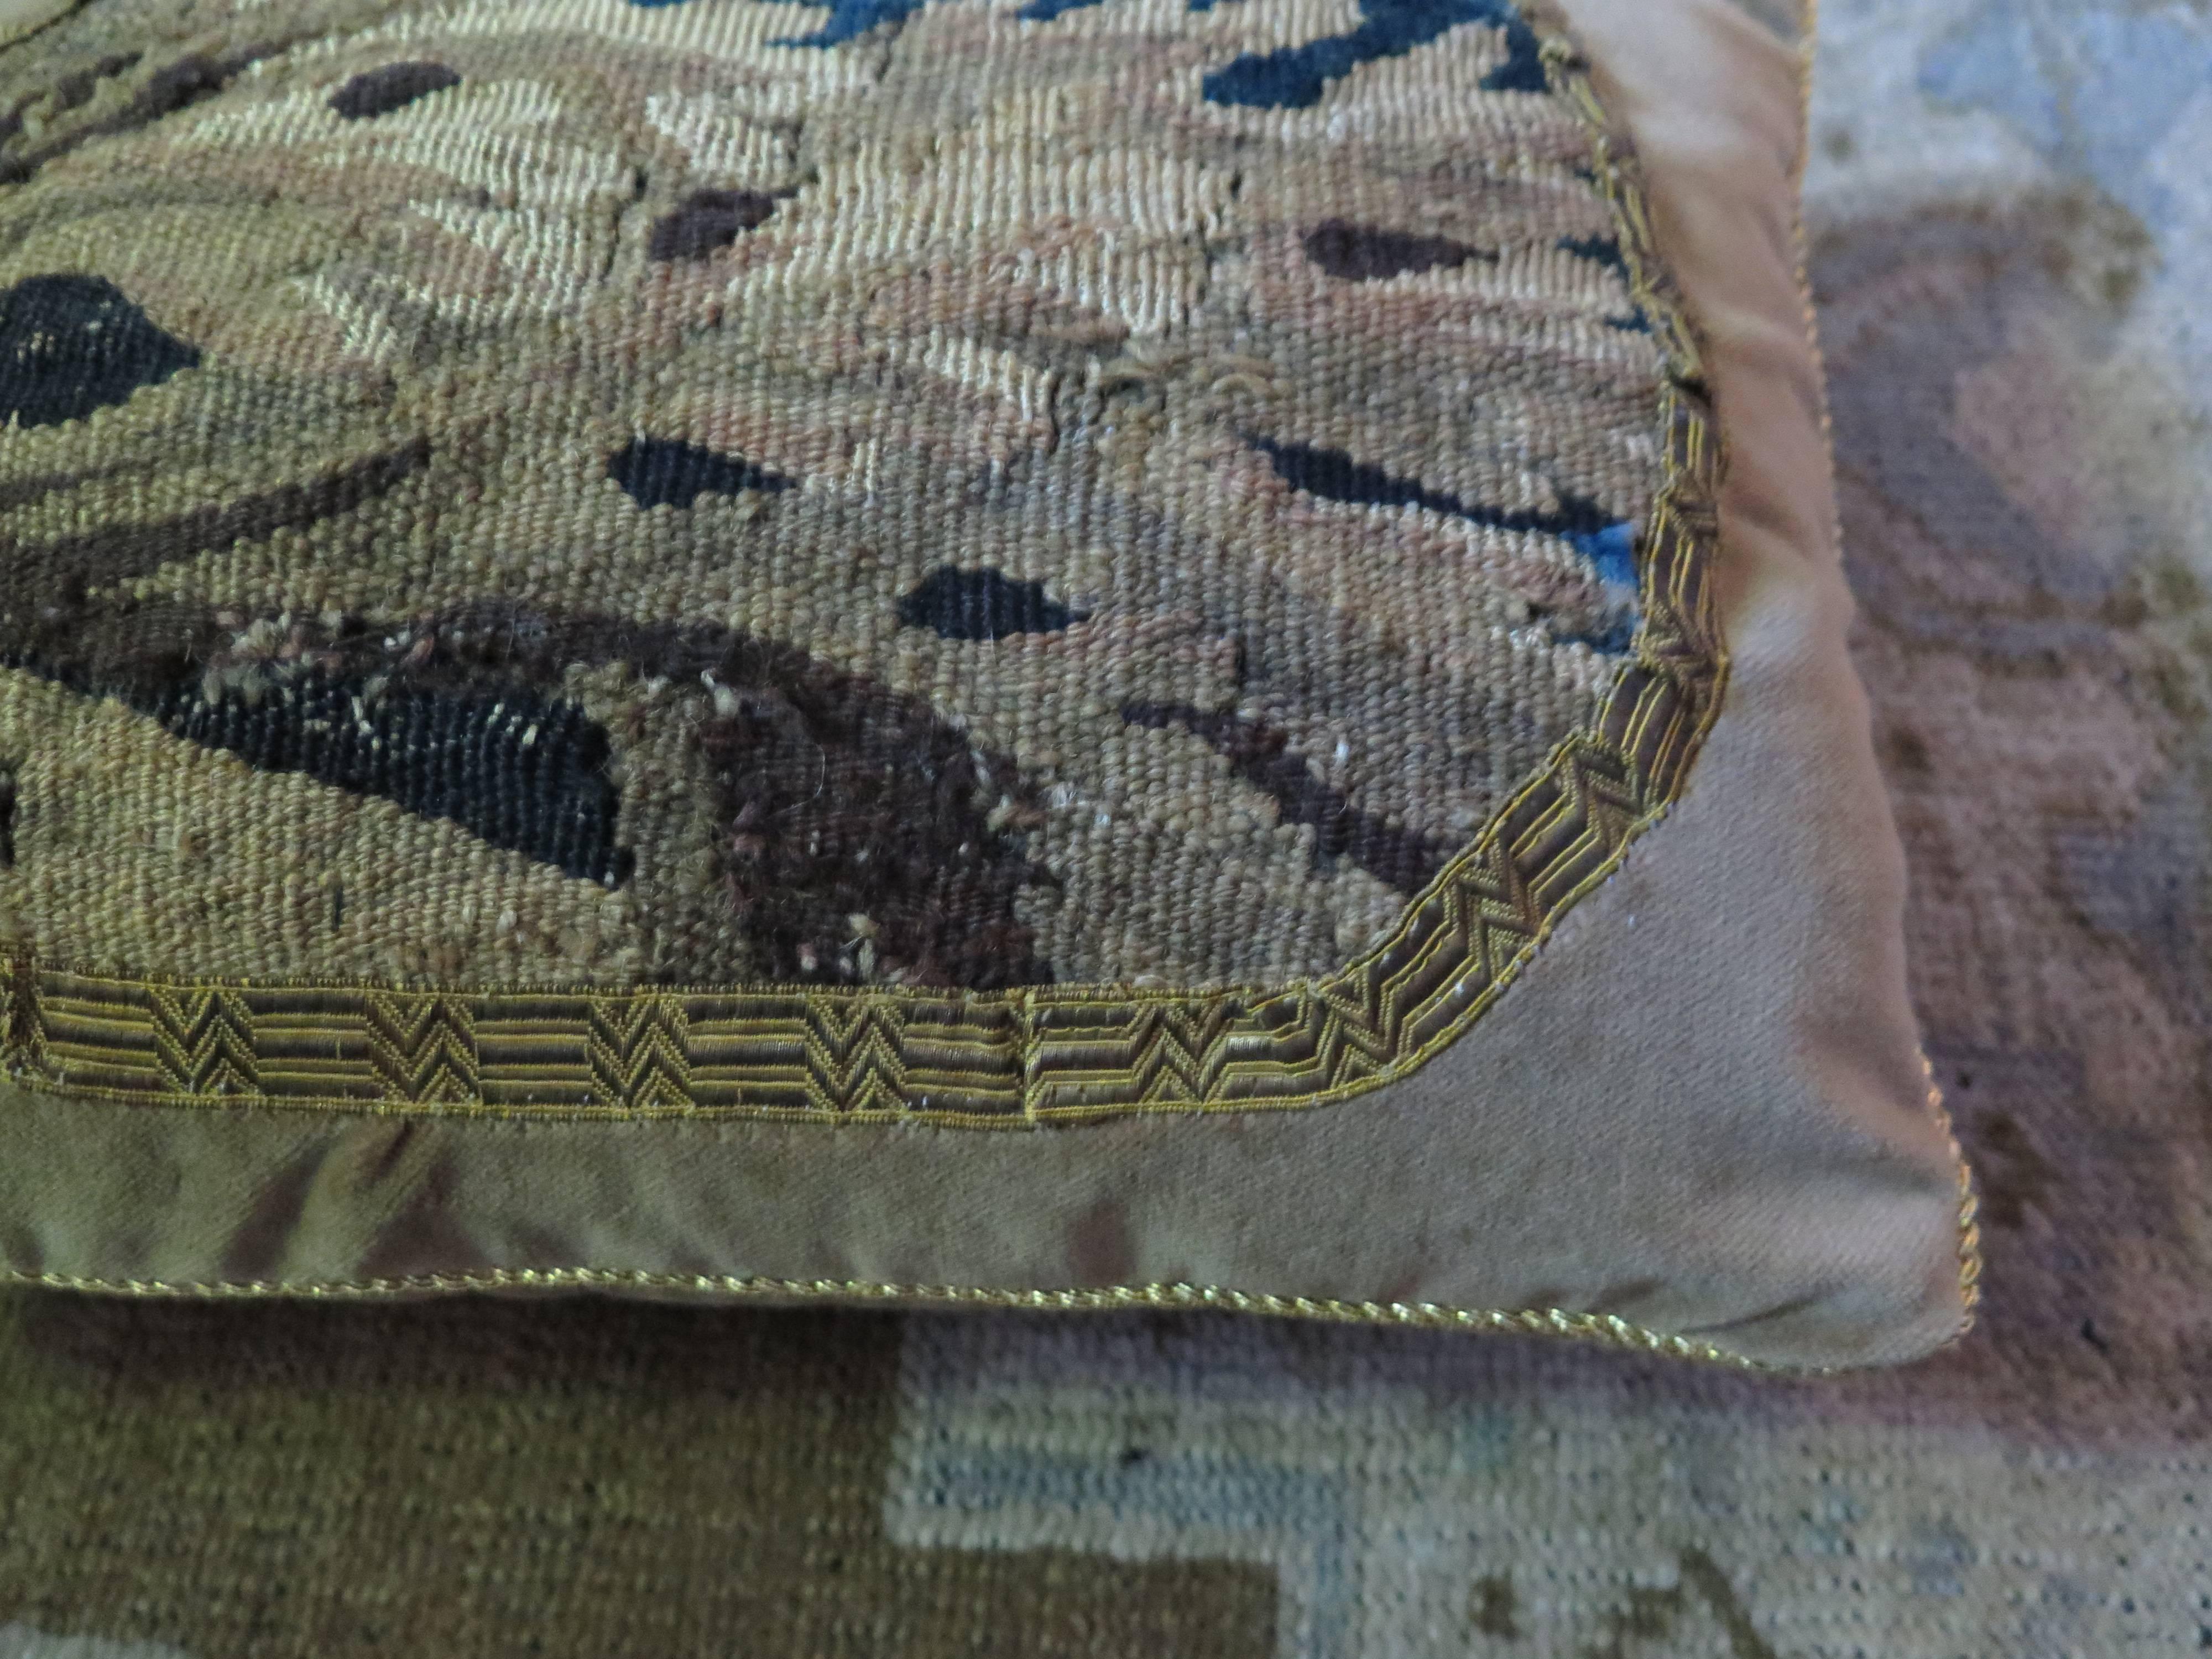 18th Century tapestry pillow in soft tan silk velvet. Pillow is edged with gold braid. Tapestry is framed in antique metallic gold ribbon. Down filled.